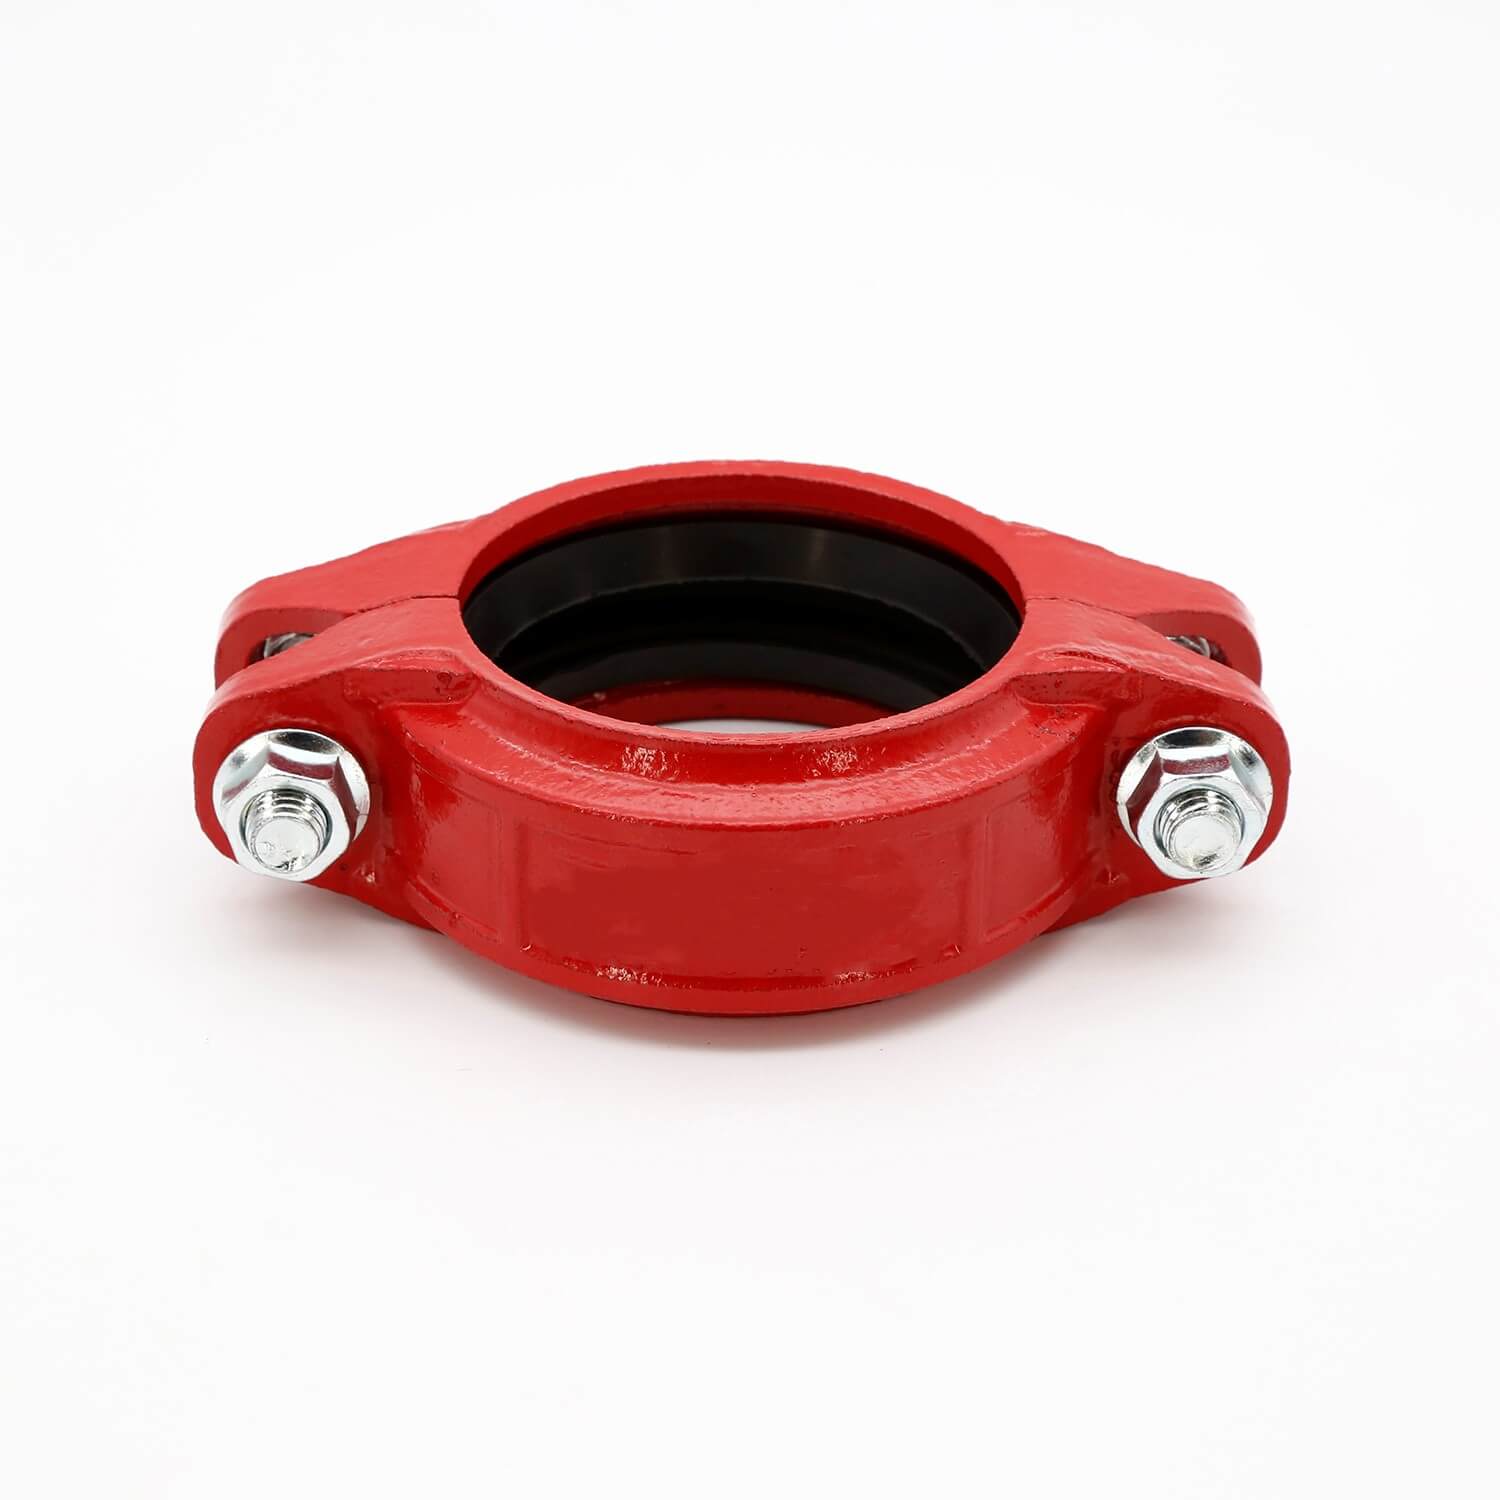 Tontr 2.5 MPa 10inch ductile iron Grooved rigid coupling for fire control